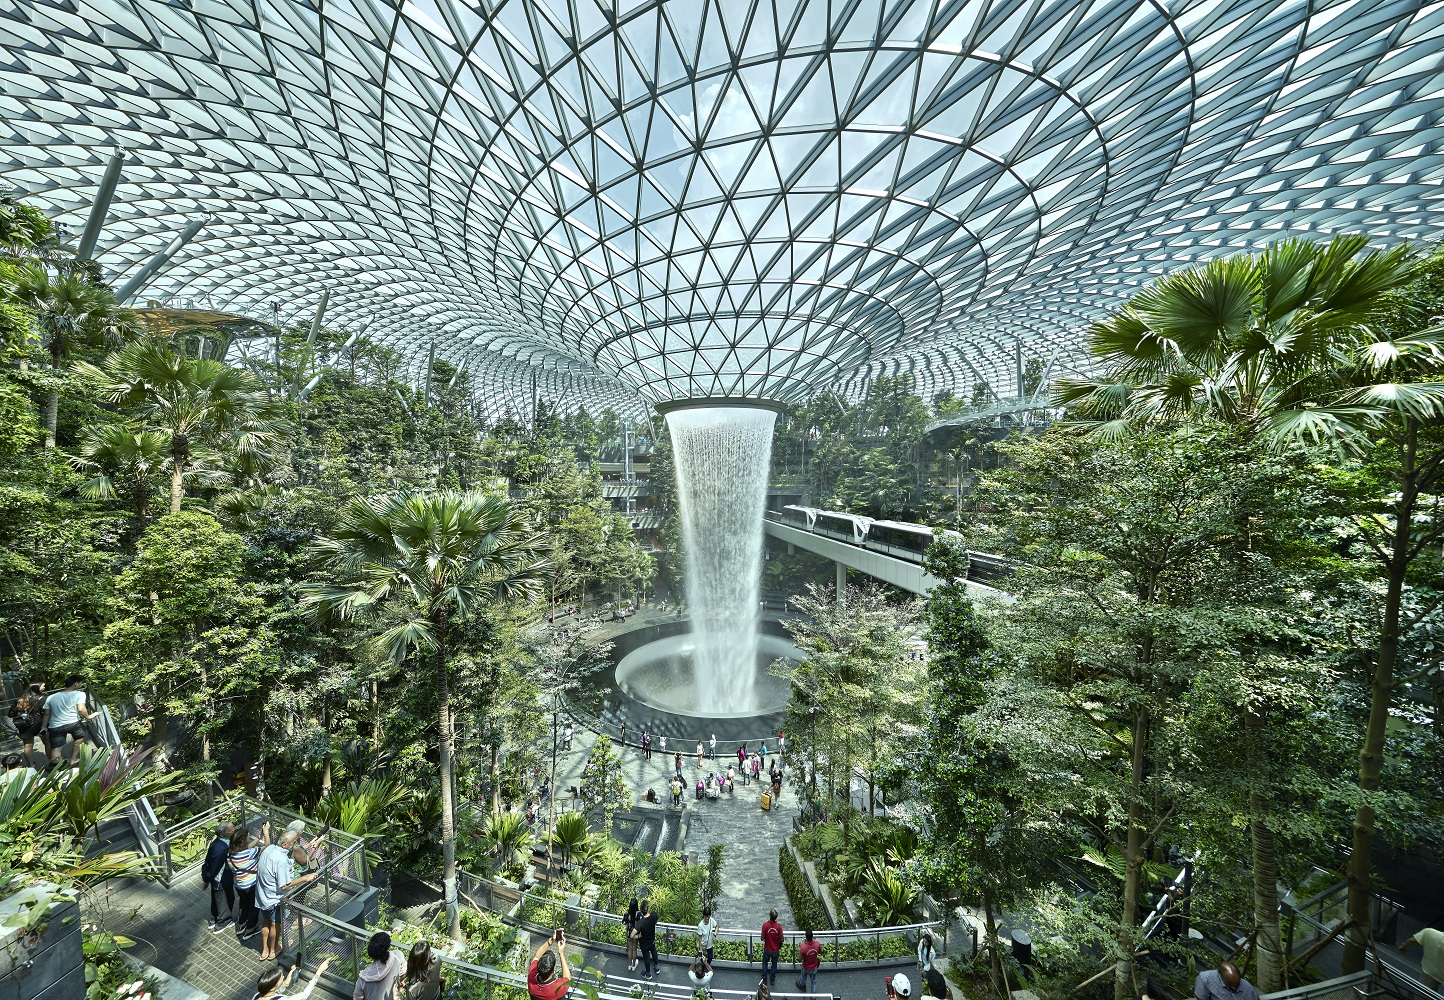 Interior photo of Jewel Changi Airport showcasing an indoor rainforest with a large waterfall in the center